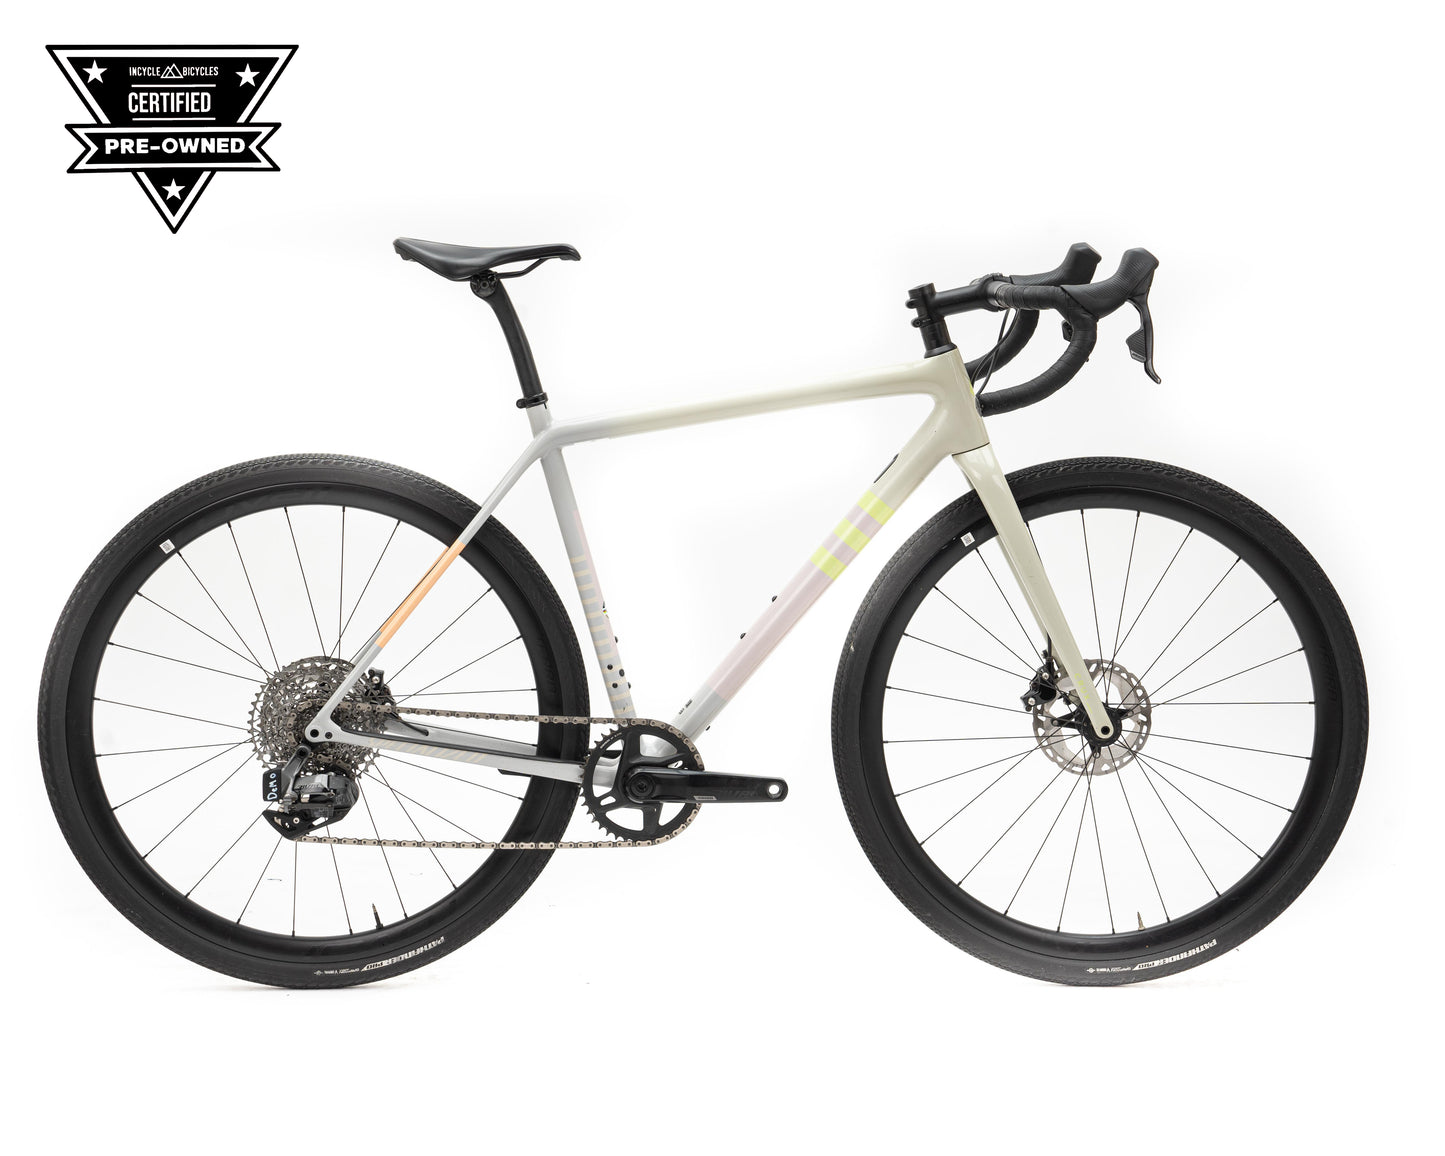 [D&R] SPECIALIZED CRUX EXPERT WHT/DOVGRY/PPYA 54